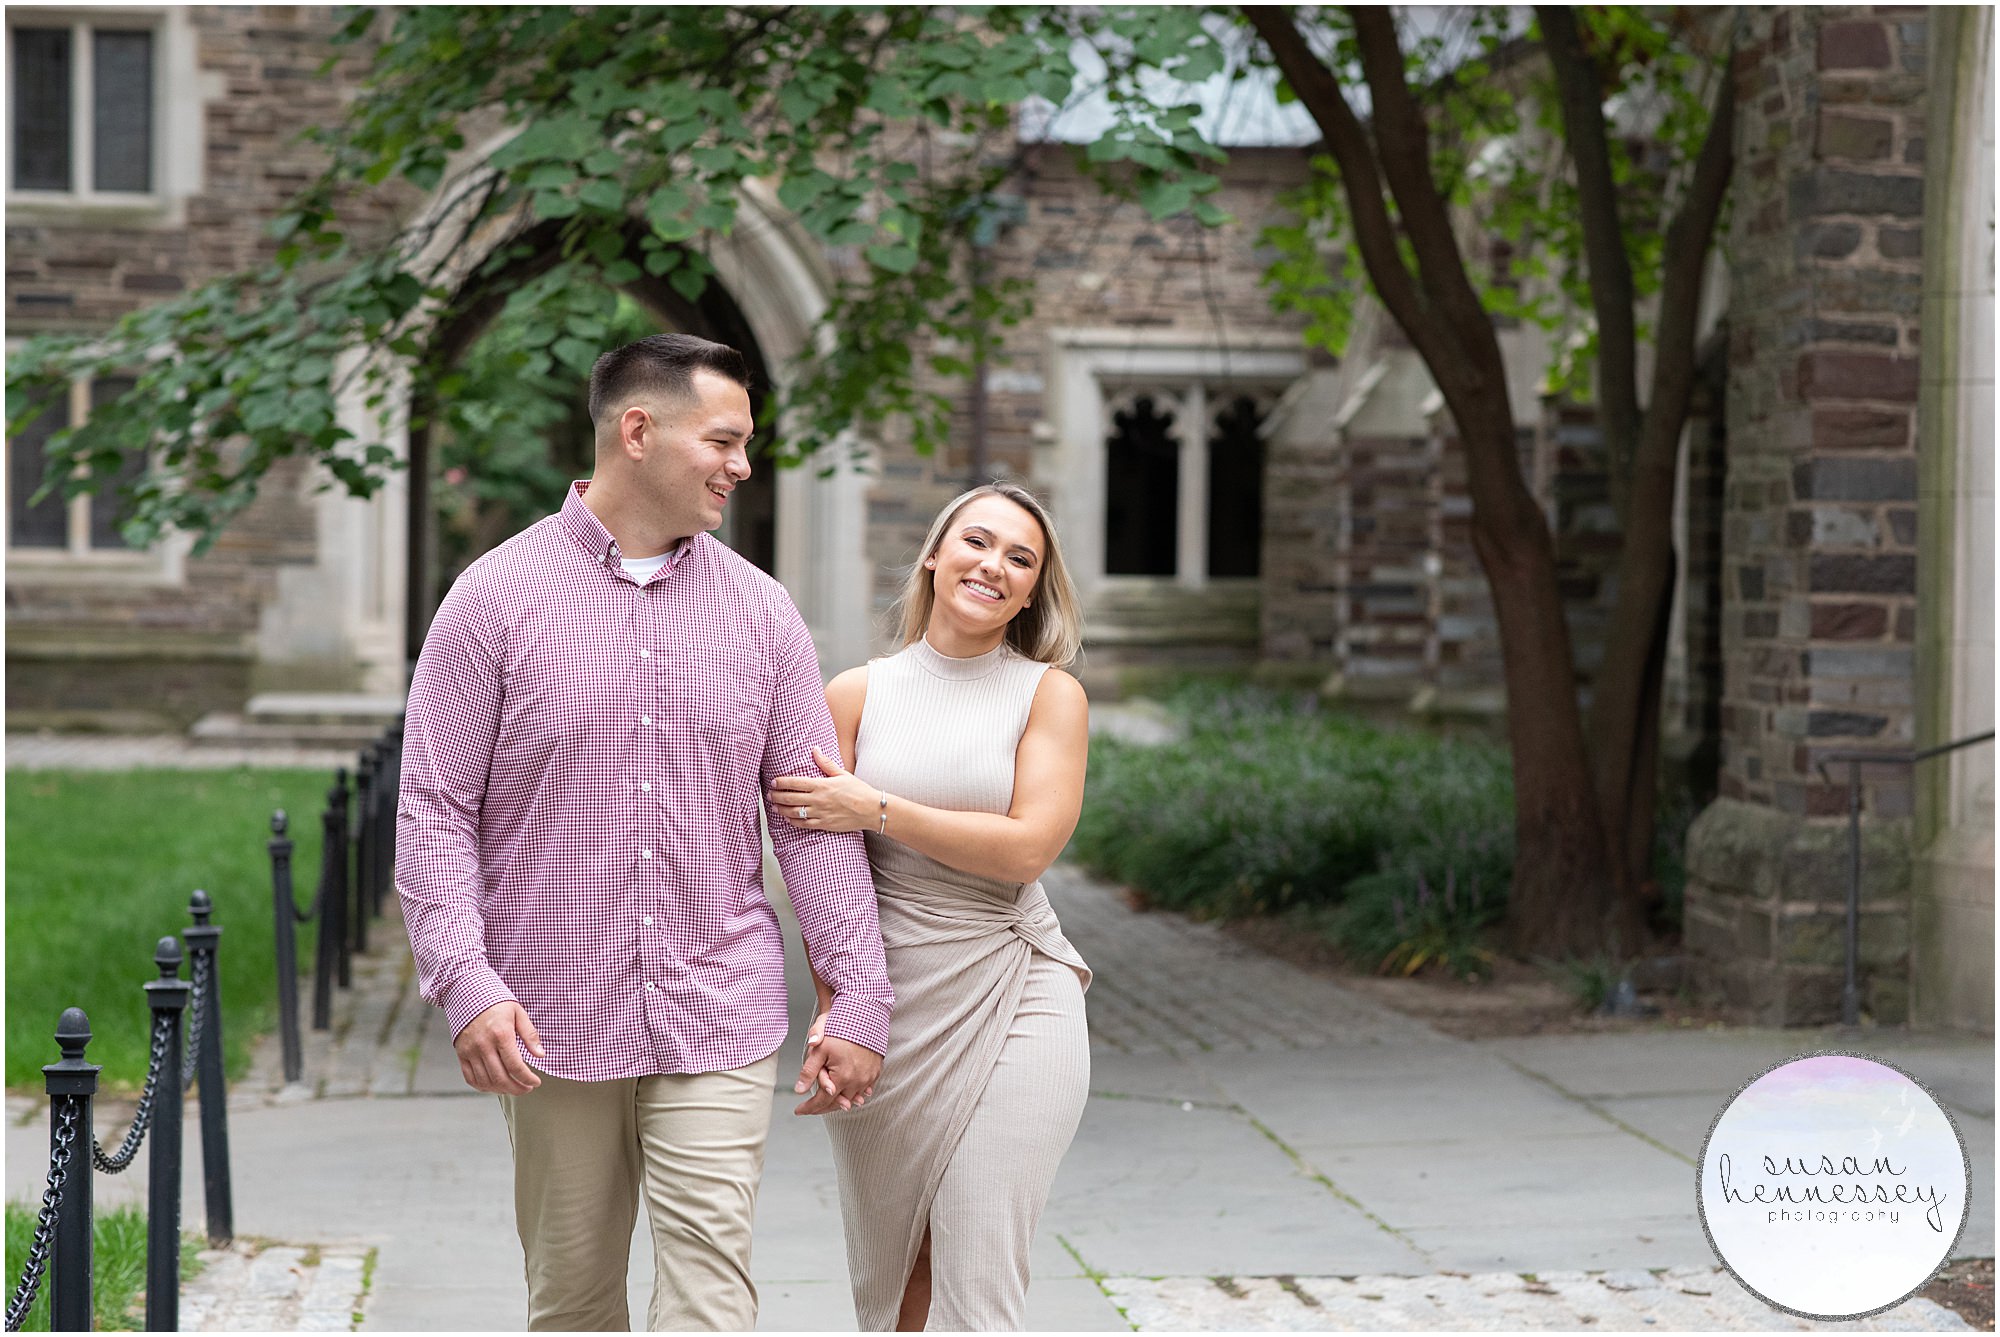 Happily engaged couple at their Princeton Engagement Session